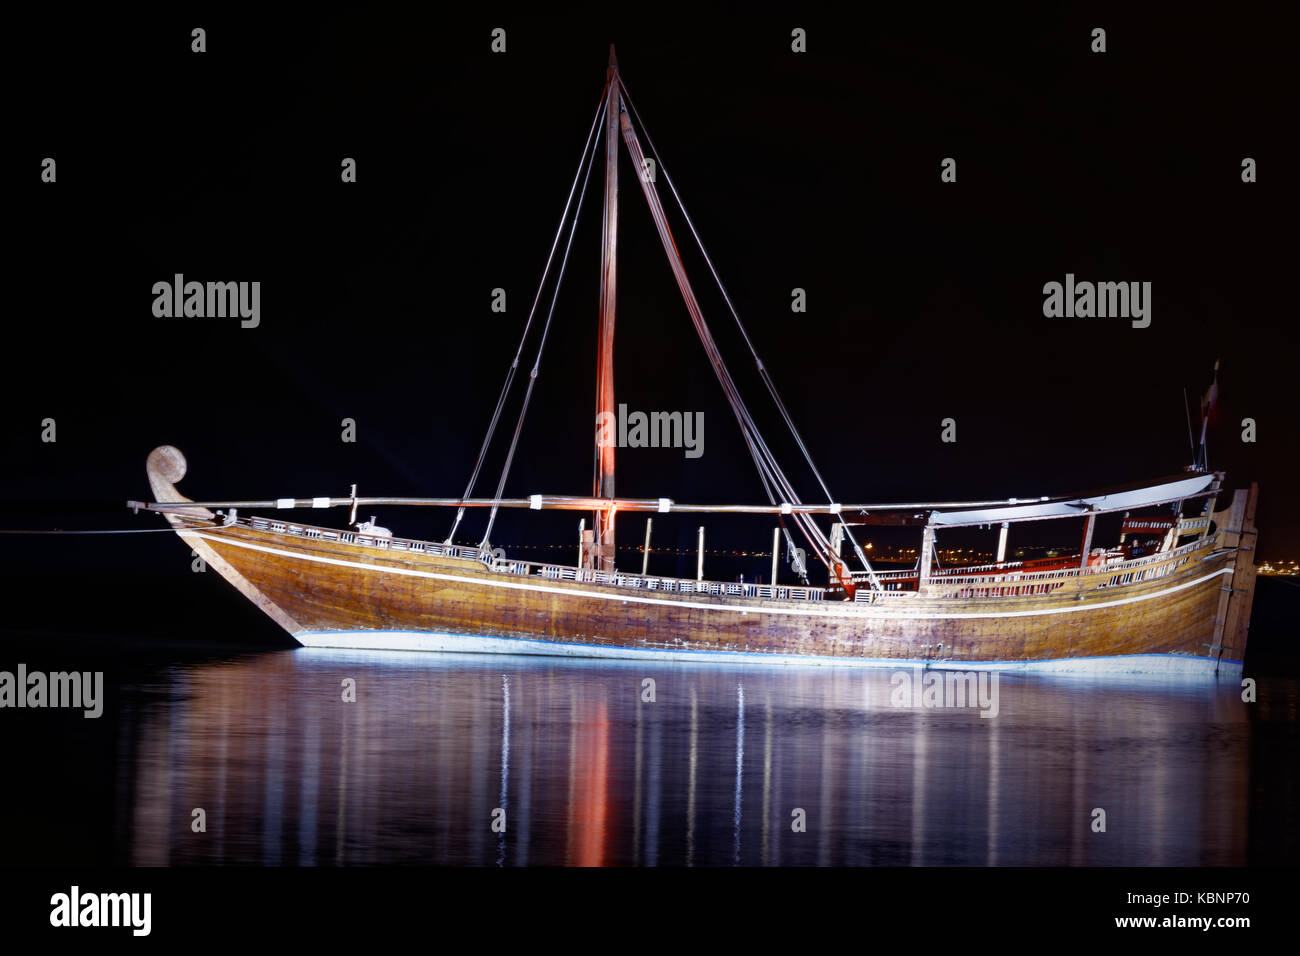 Traditional wooden boat(dhow)  in Arabic gulf at nigh with reflection in water  in Doha, Qatar. Stock Photo